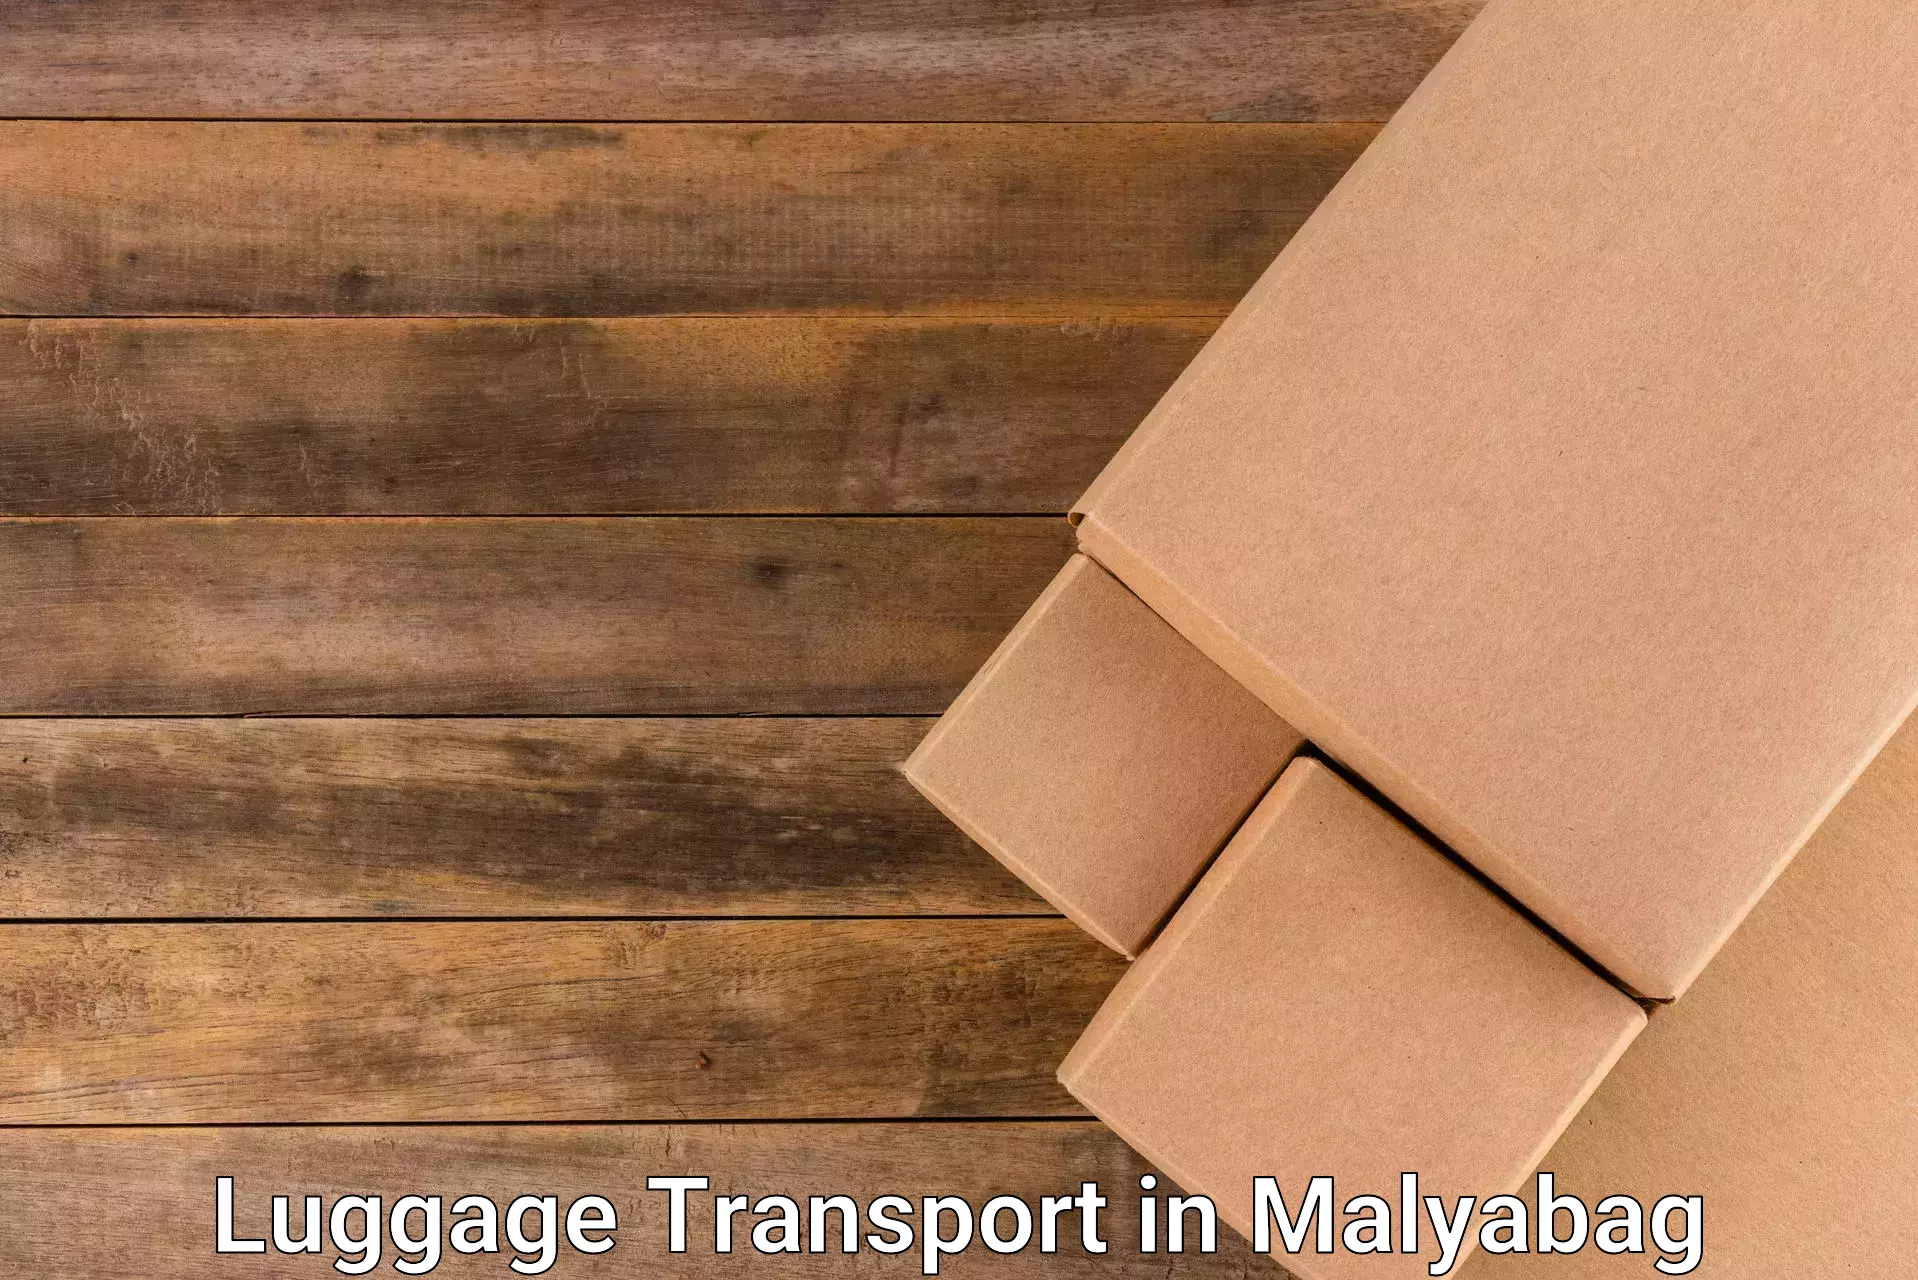 Luggage delivery logistics in Malyabag